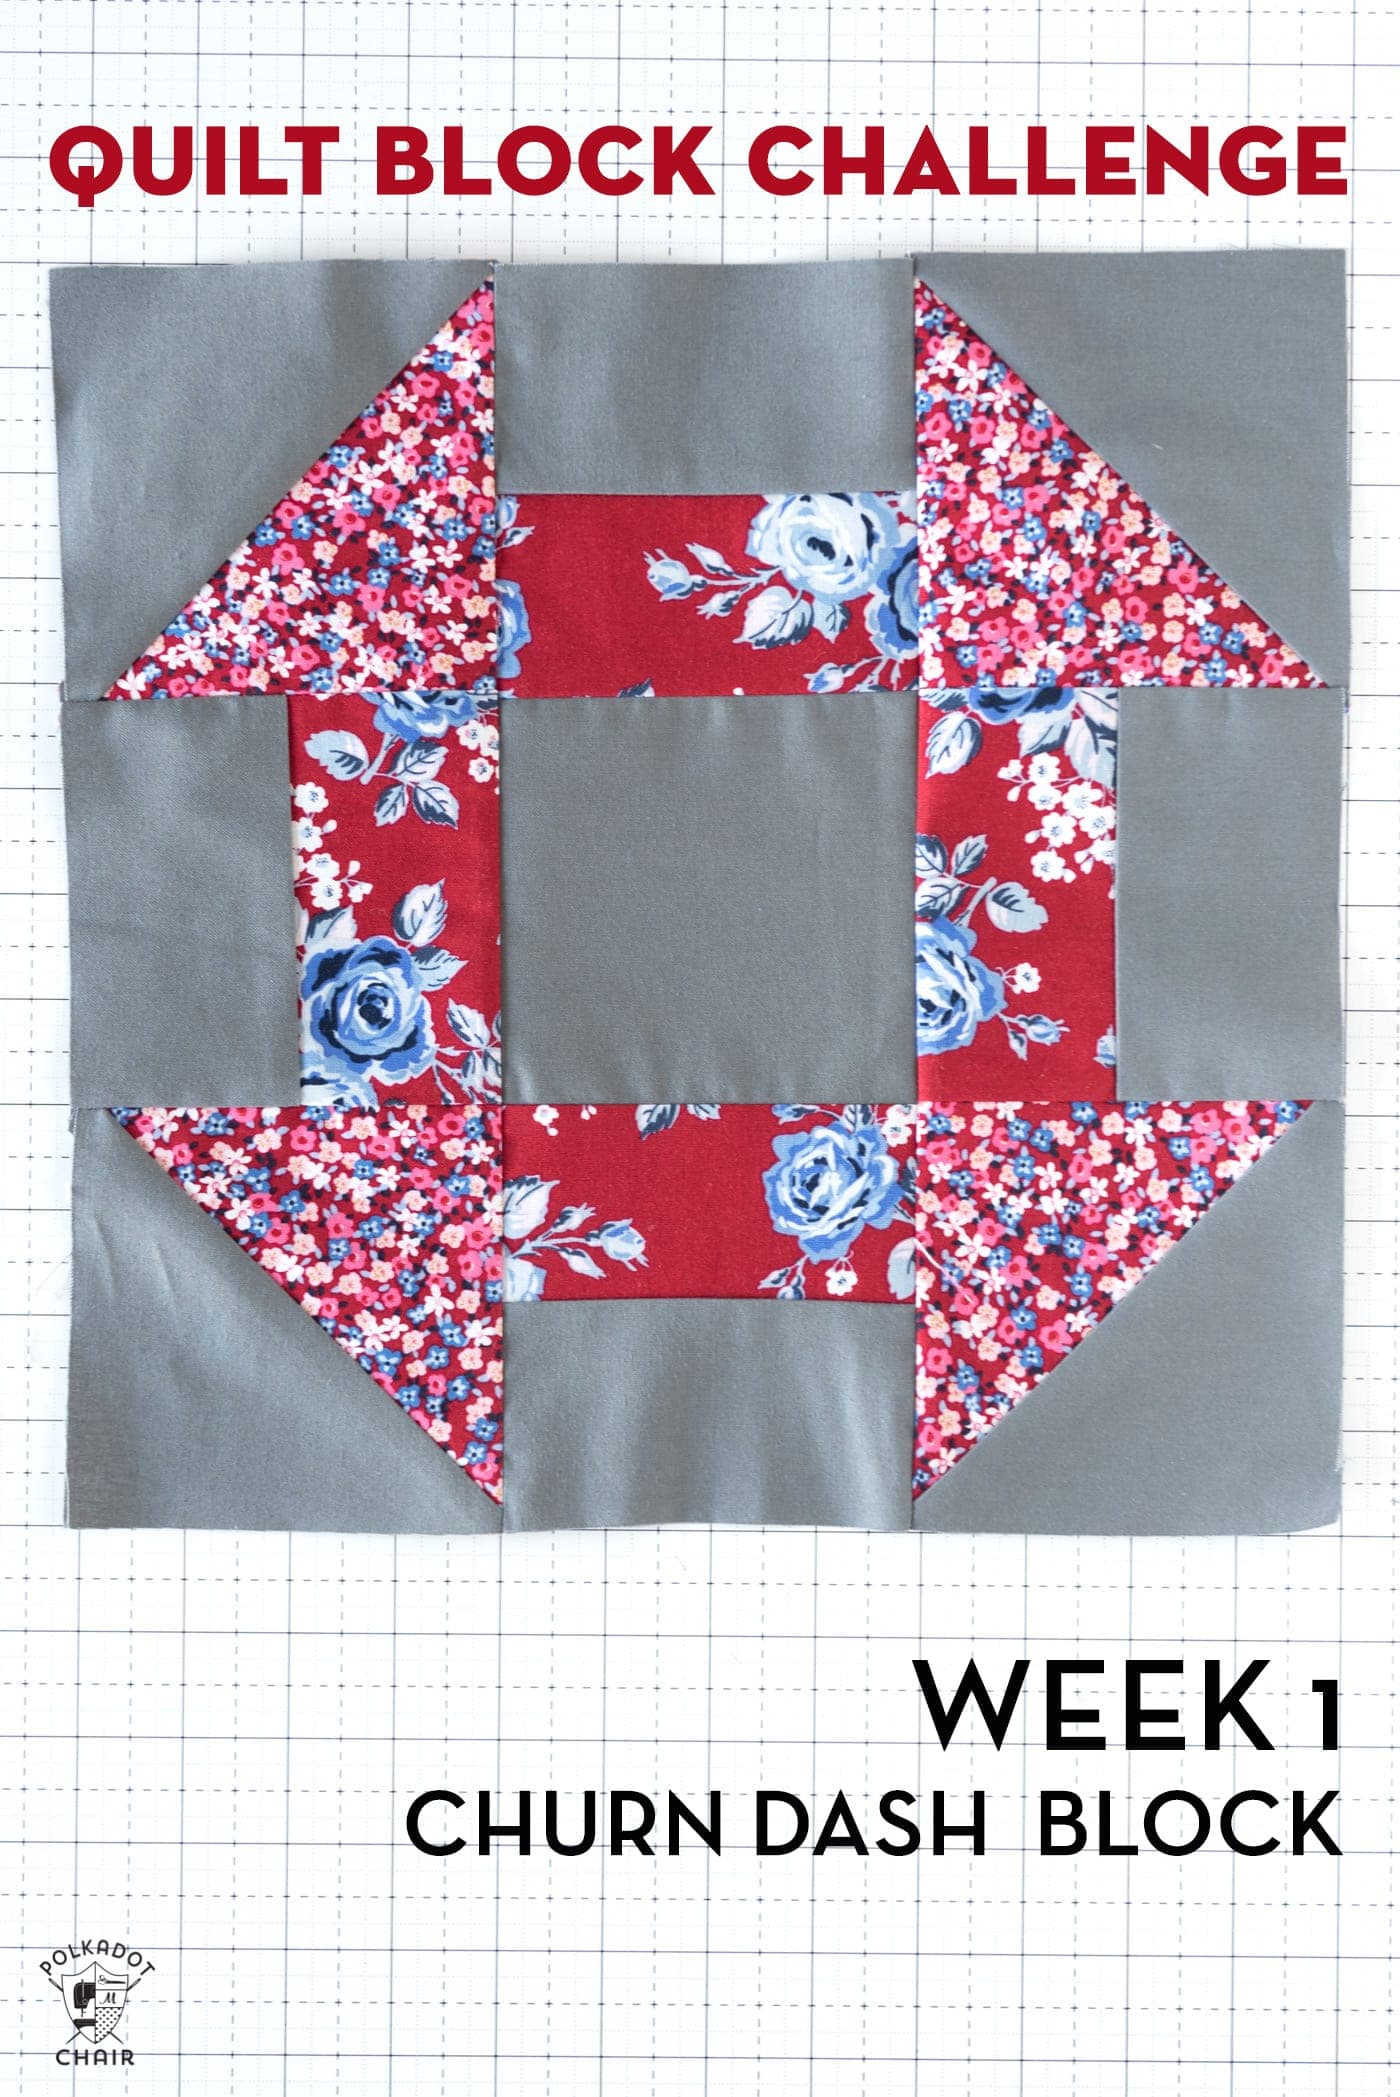 Finishing a Quilt with Riley Blake and the Cricut Maker - Diary of a  Quilter - a quilt blog